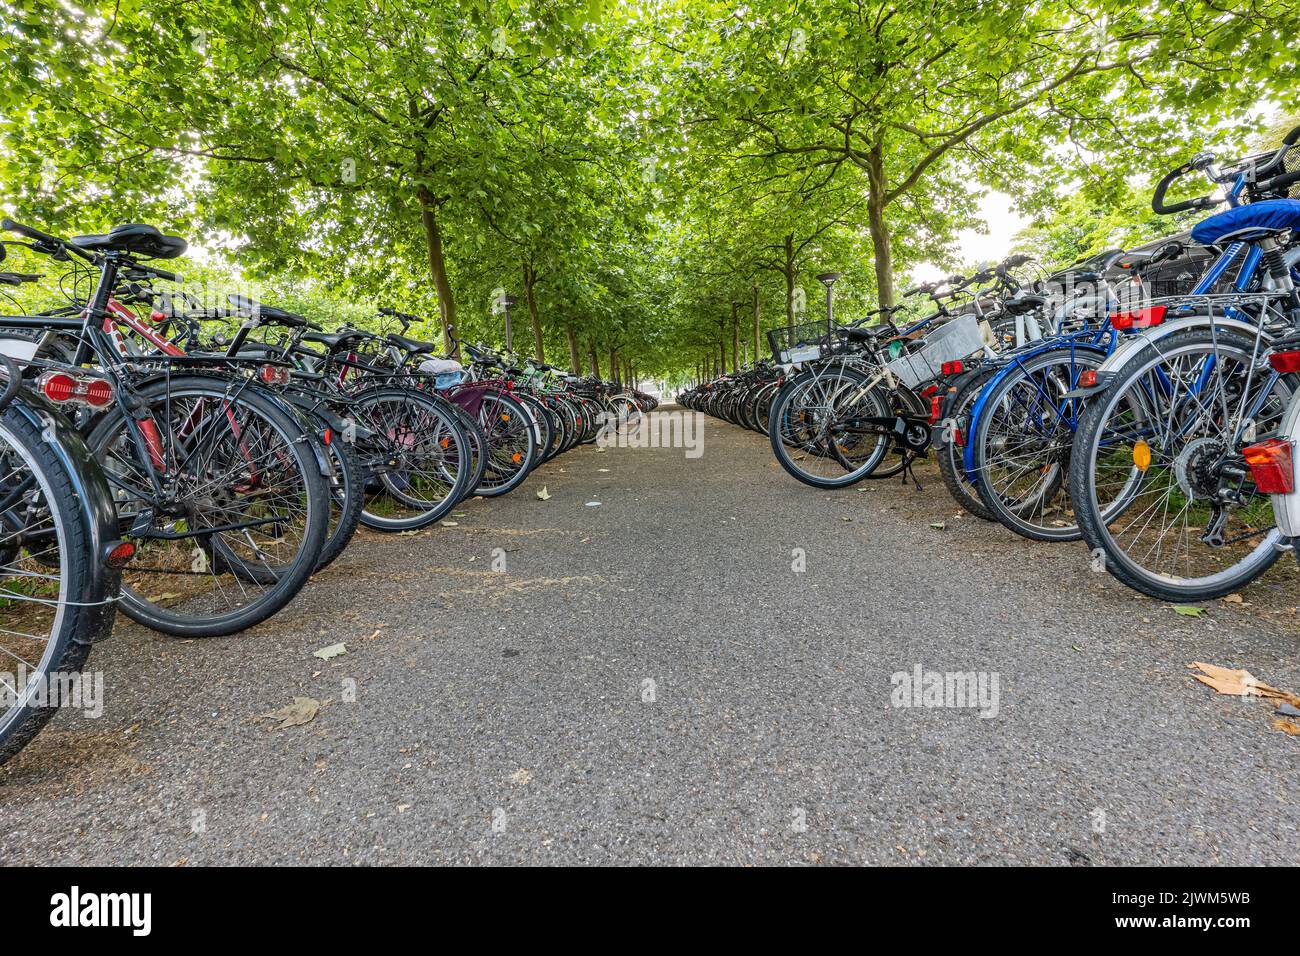 long, never-ending corridor of a large bicycle parking lot countless bicycles Stock Photo